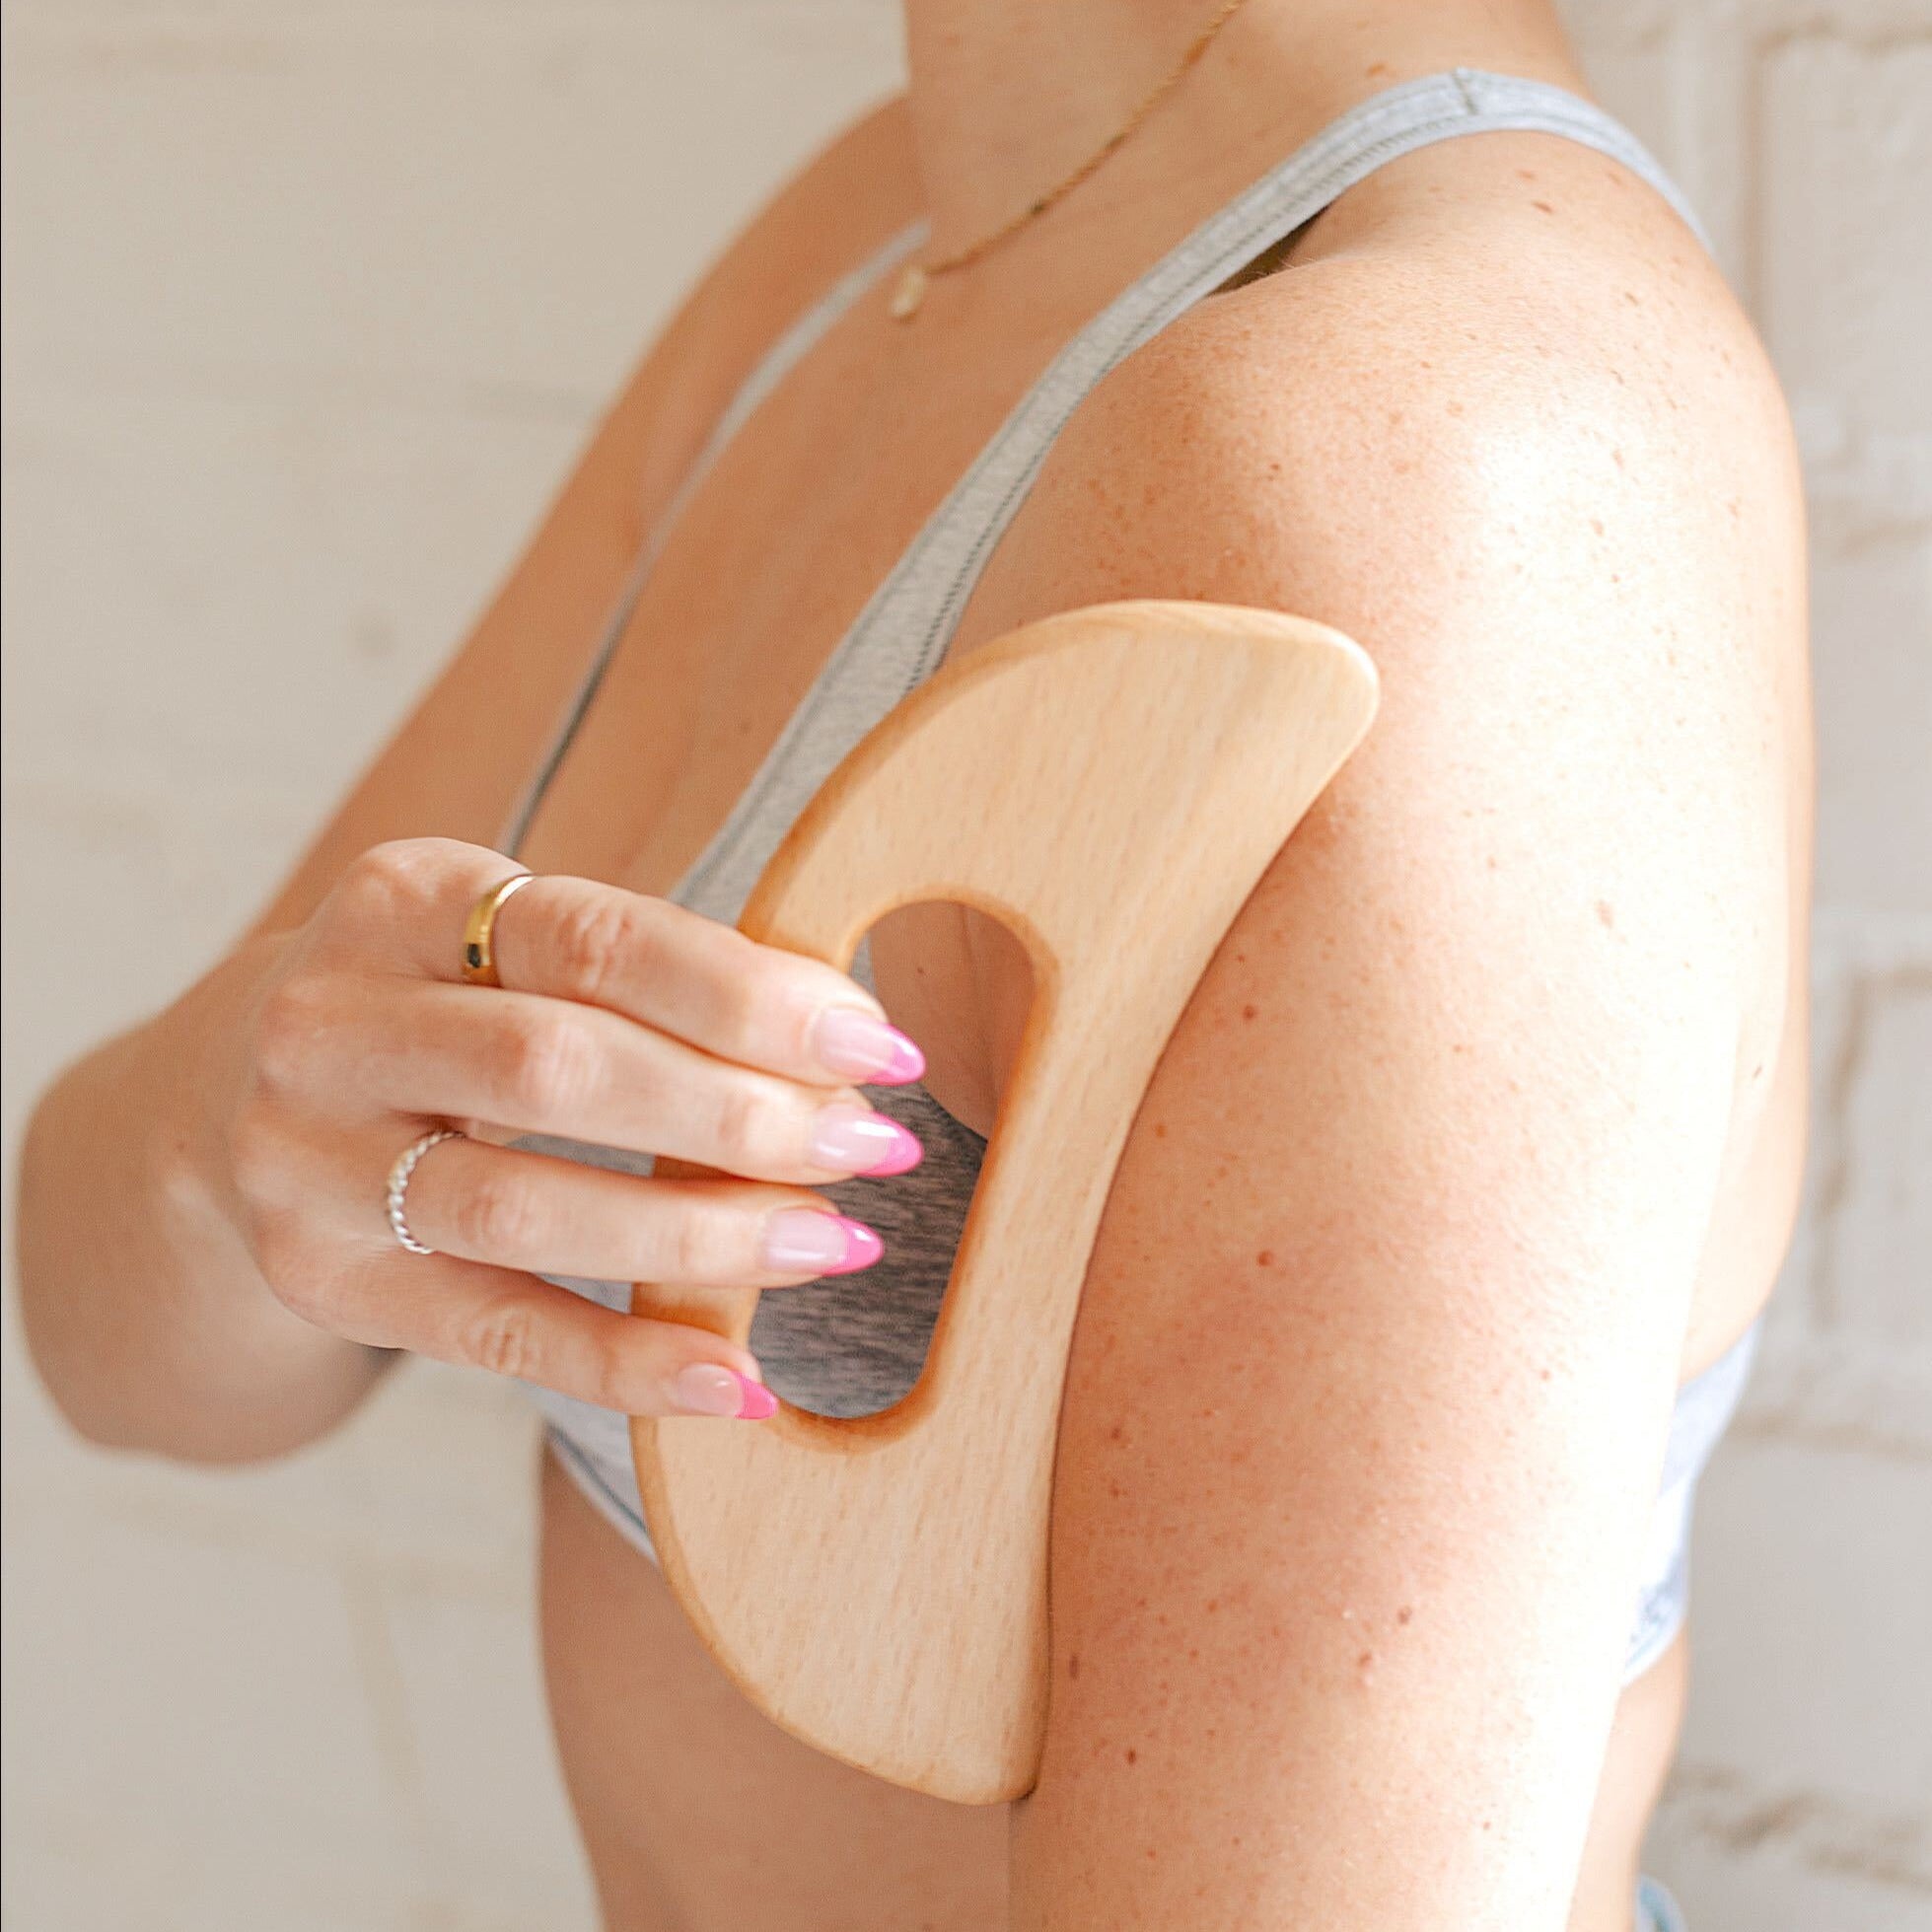 A woman using a wooden lymphatic drainage tool on her left arm while her right hand holds the tool against her skin. She is wearing a gray sports bra standing in front of a white brick background.